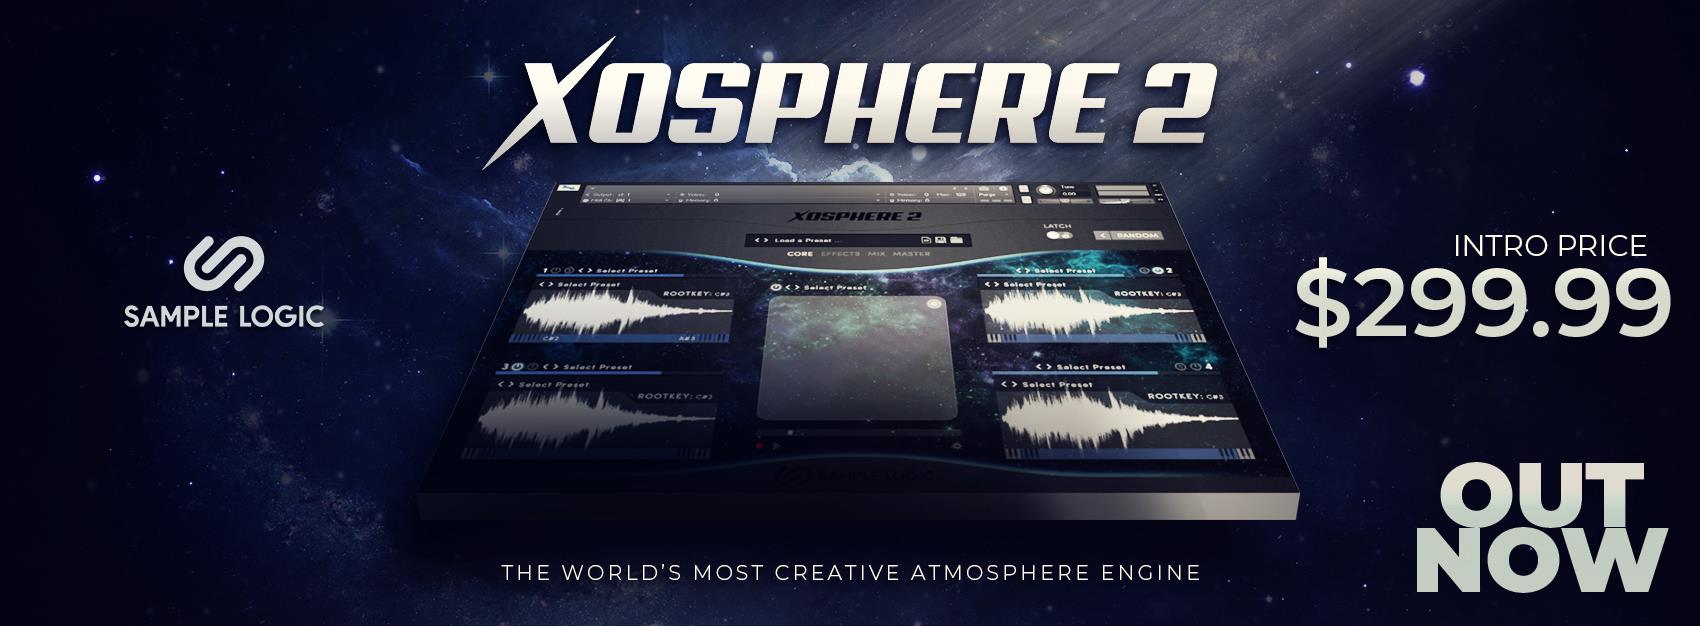 XOSPHERE 2 now at an introductory price of 299.99